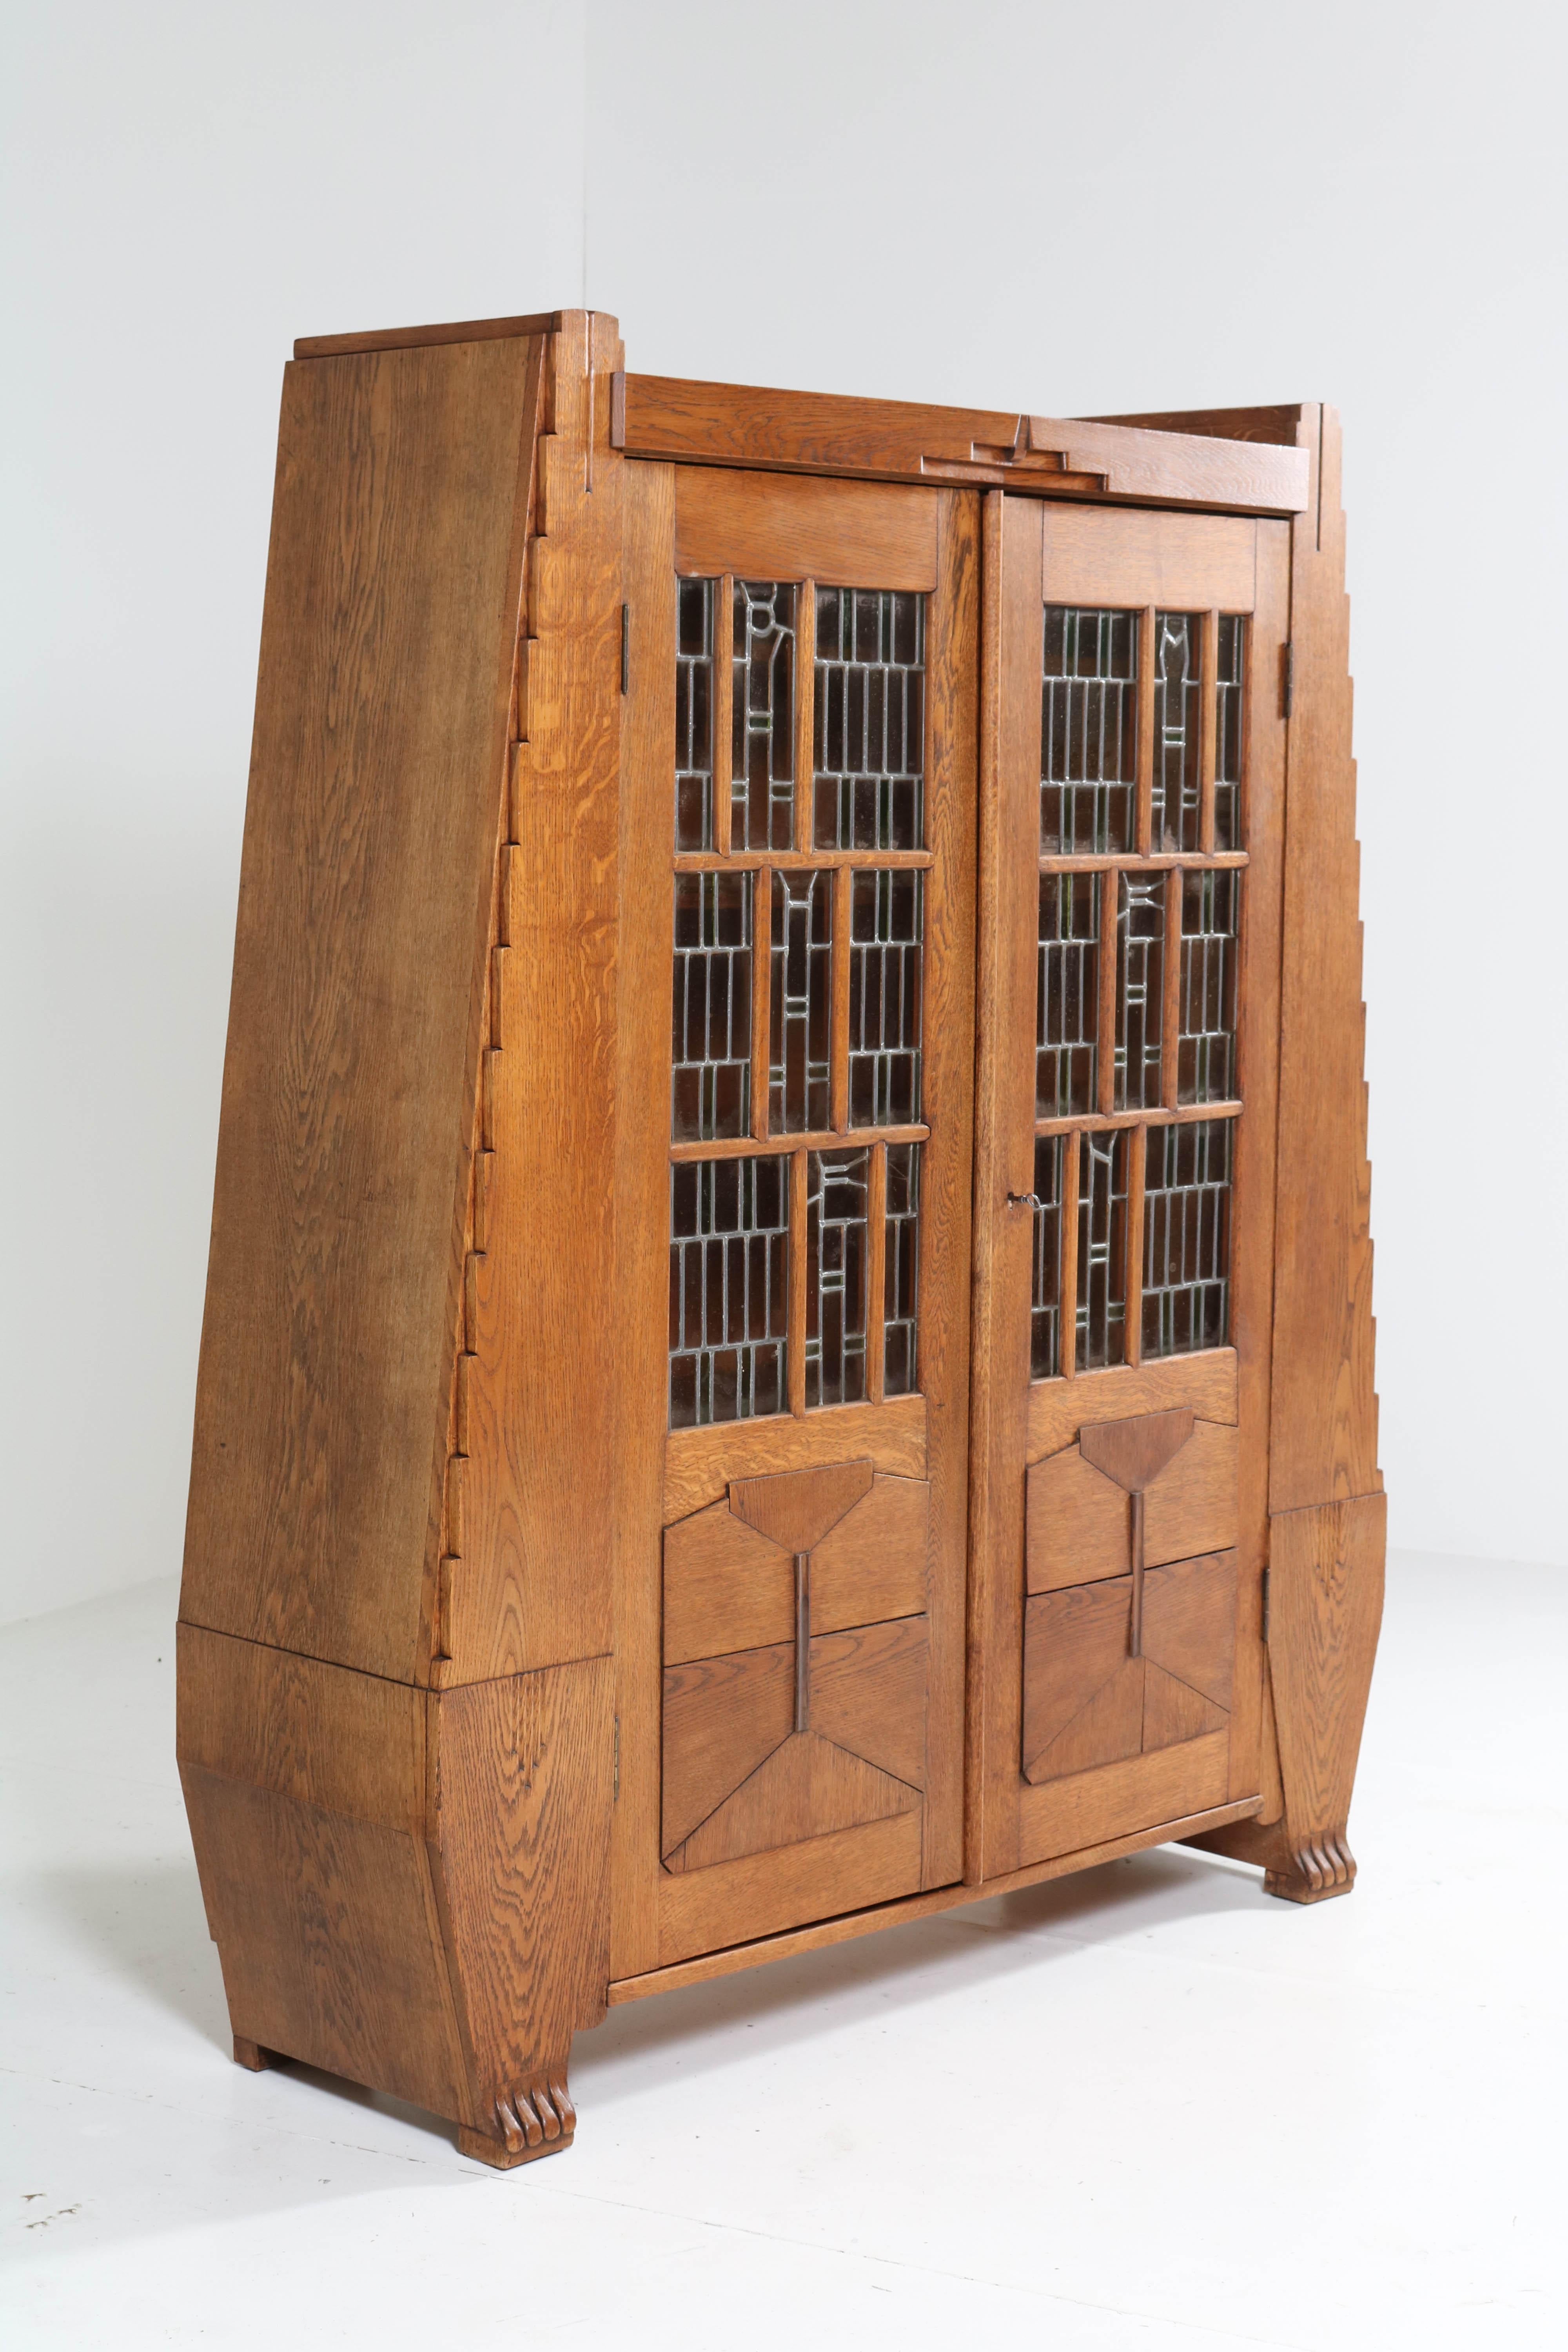 Oak Art Deco Amsterdam School Bookcase with Stained Glass by Hildo Krop, 1918 12